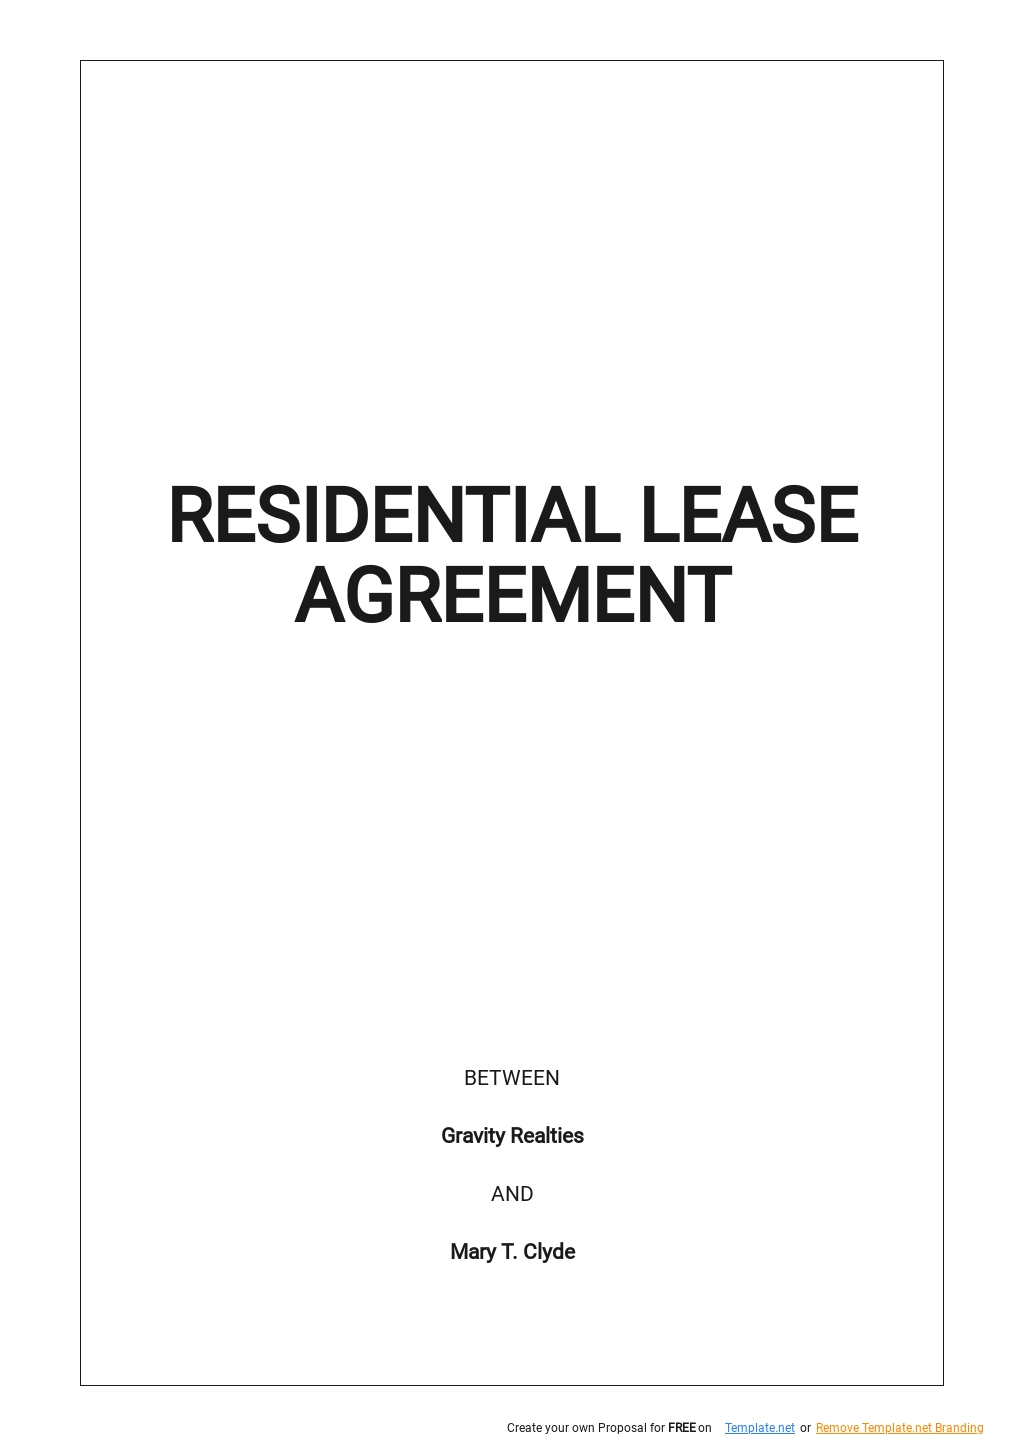 Free Residential Lease Agreement Templates, 15+ Download in Word, Pages